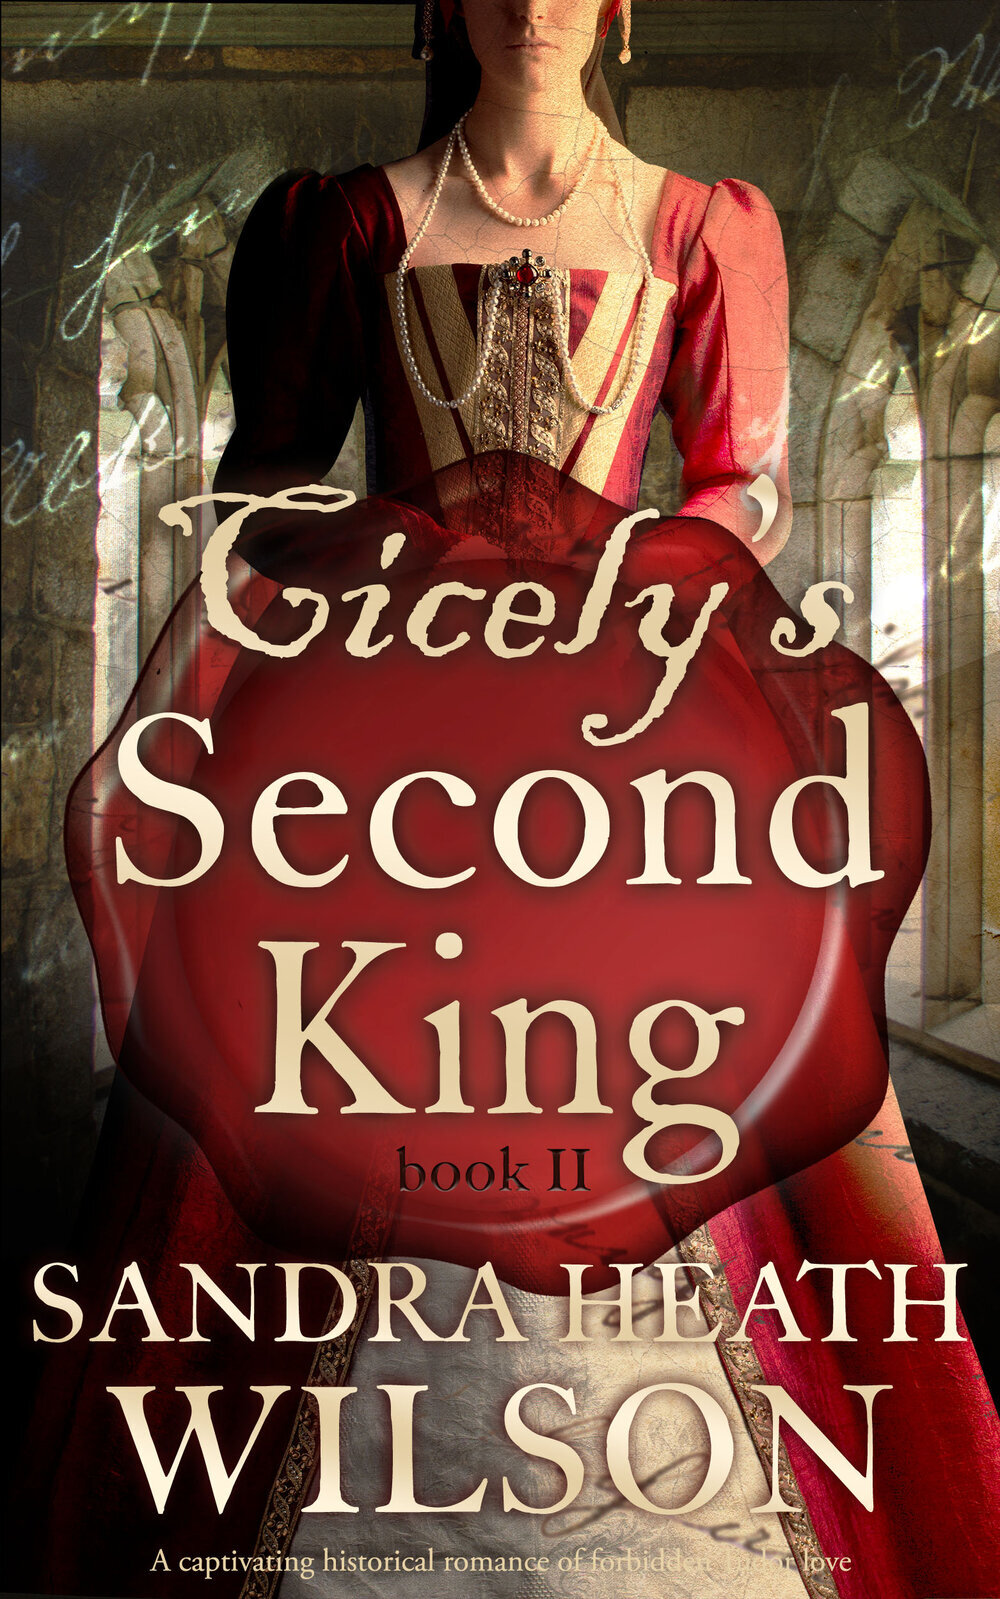 Cicely's+Second+King+publish+cover+with+tagline.jpg